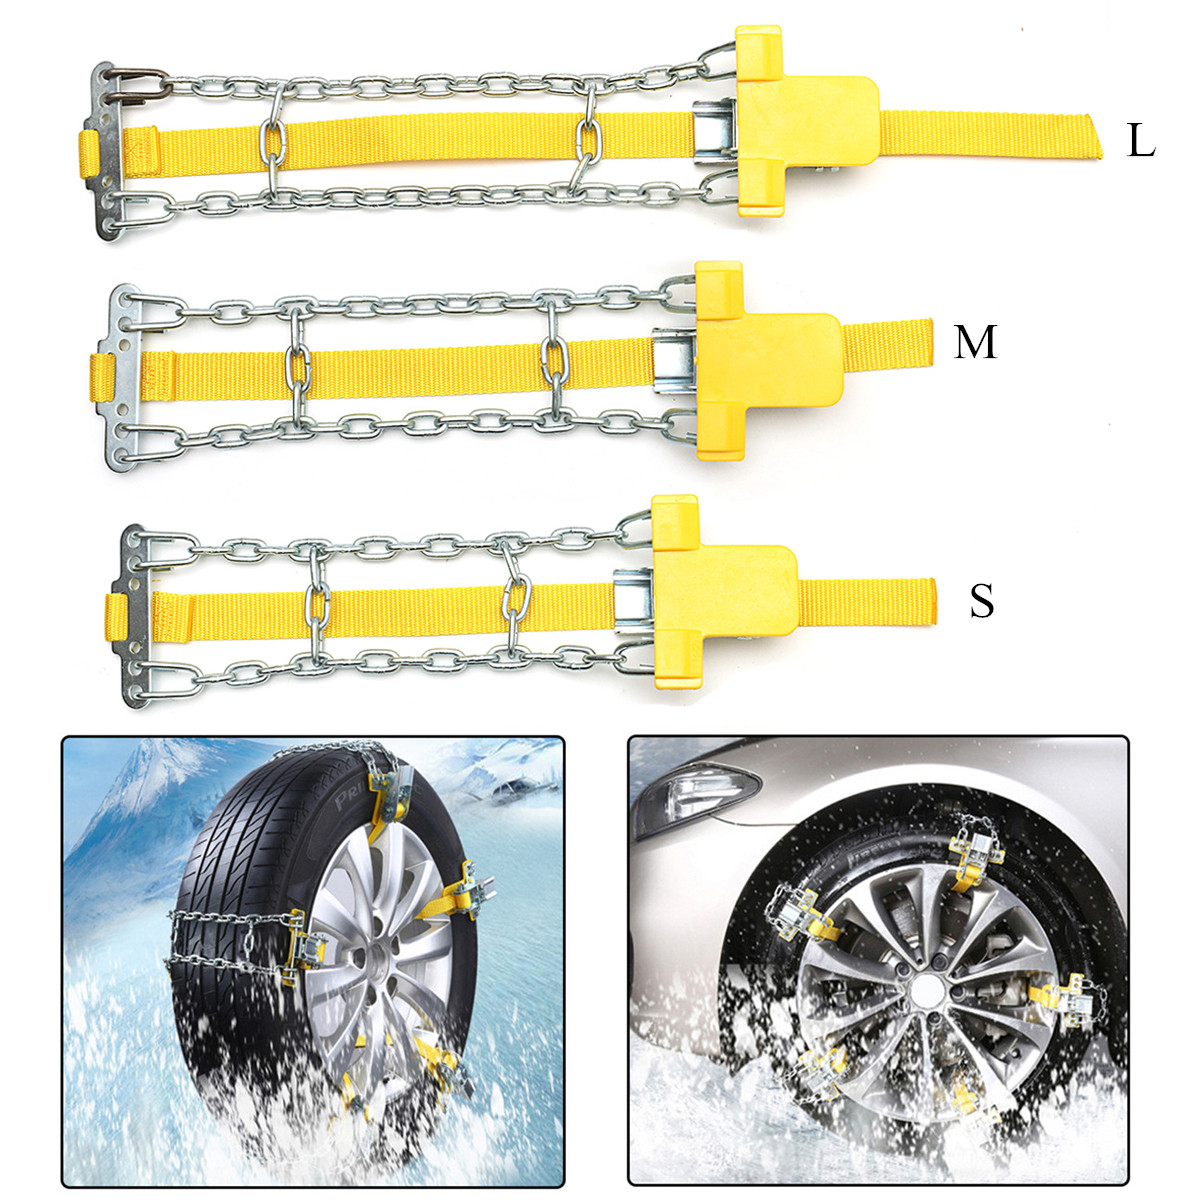 205-225mm Tire Anti-skid Steel Chain Snow Mud Car Security Tyre Belt For Truck